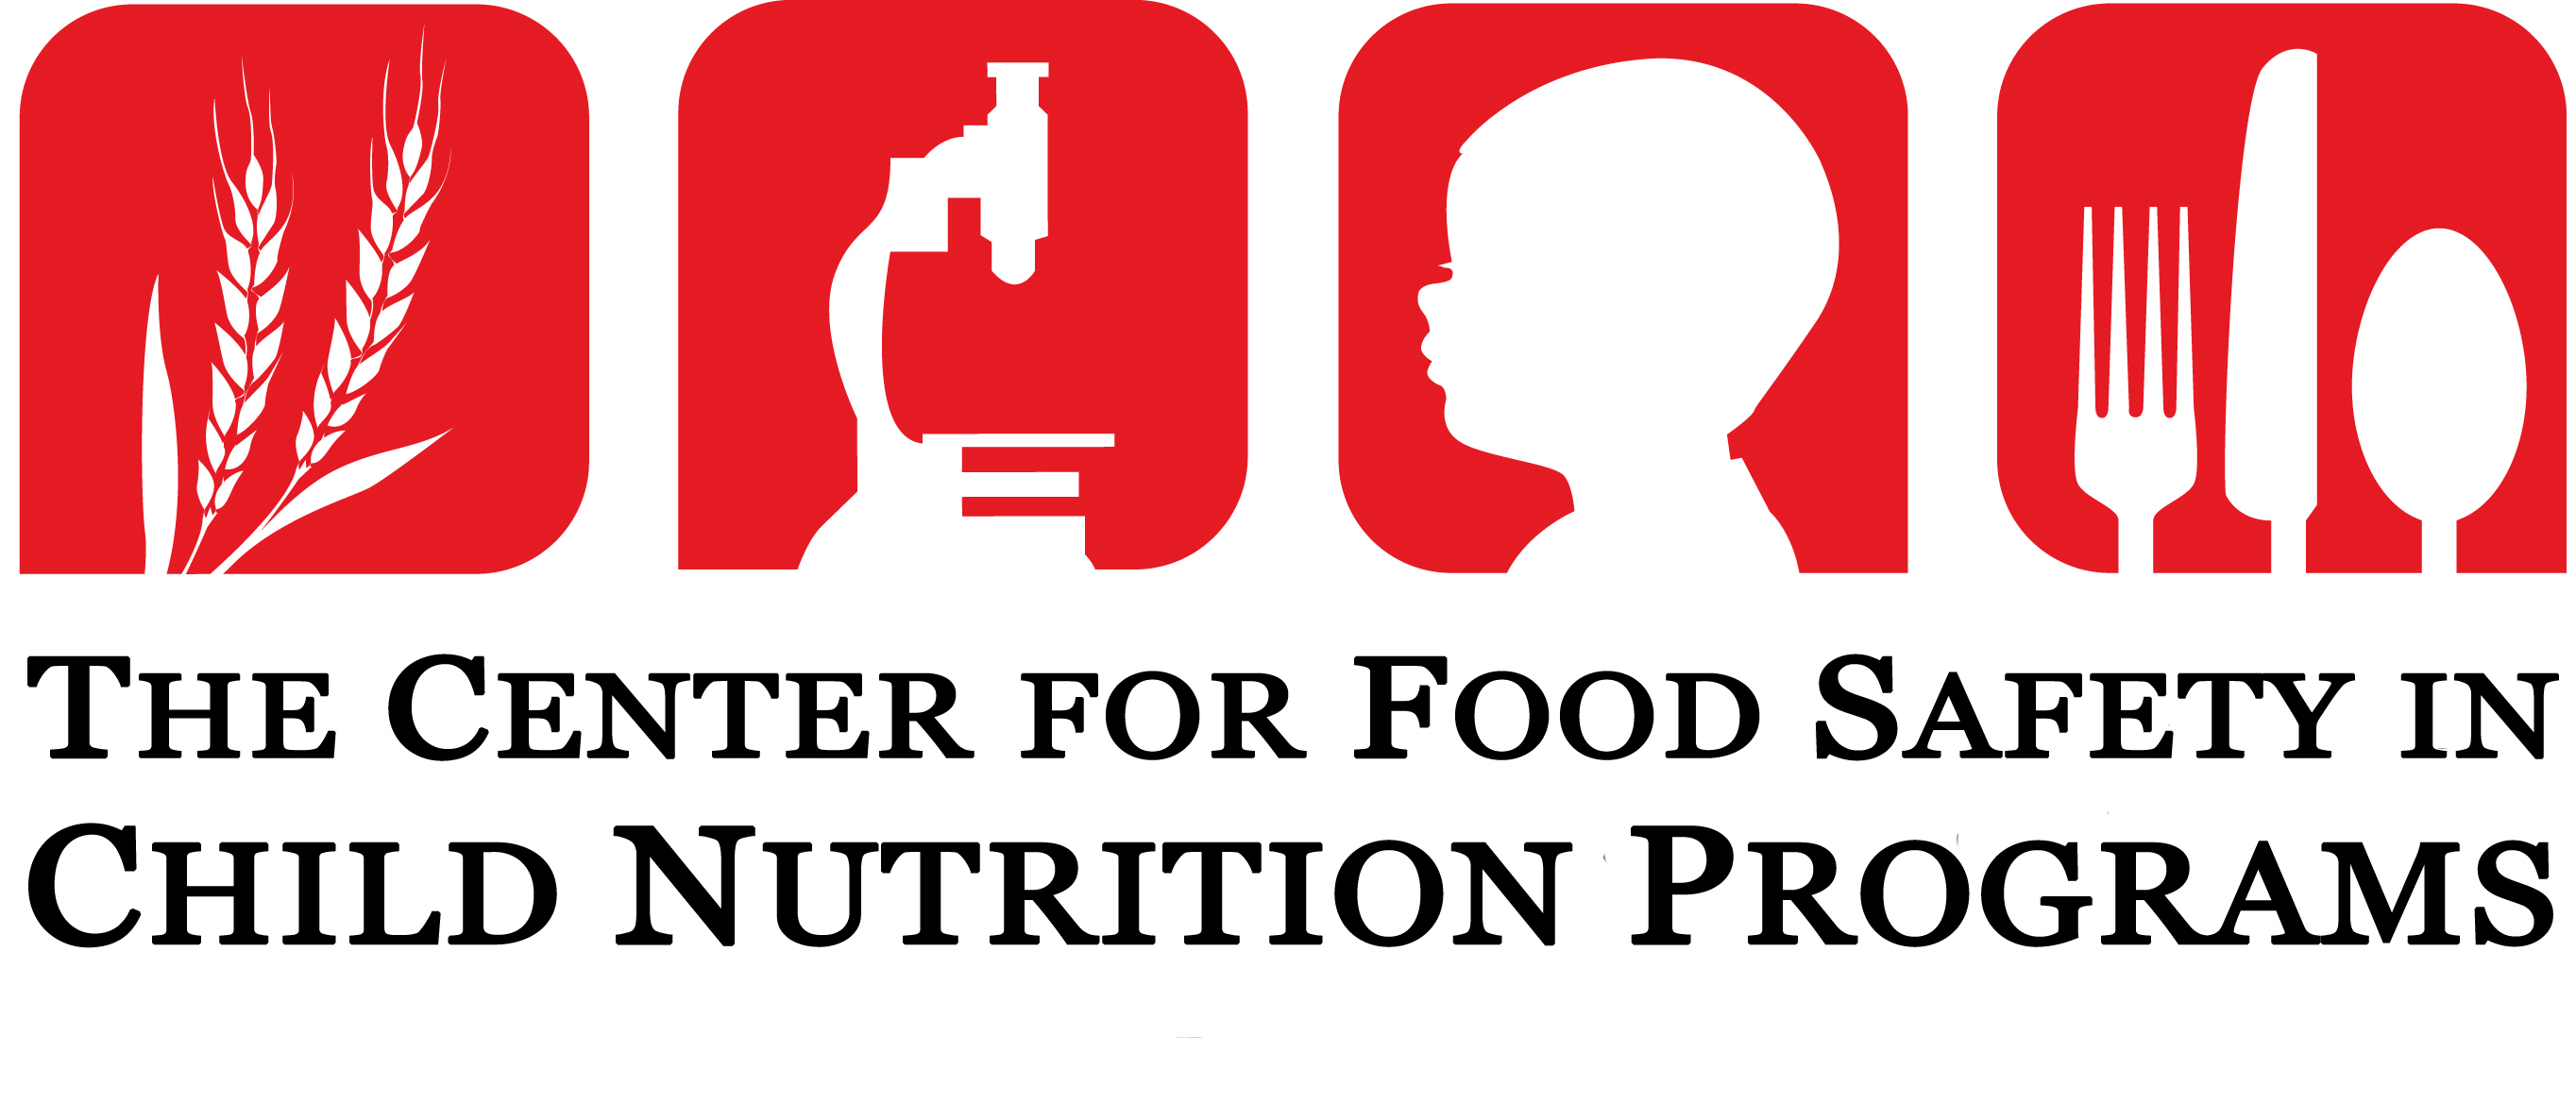 Center of Excellence for Food Safety Research in Child Nutrition Programs